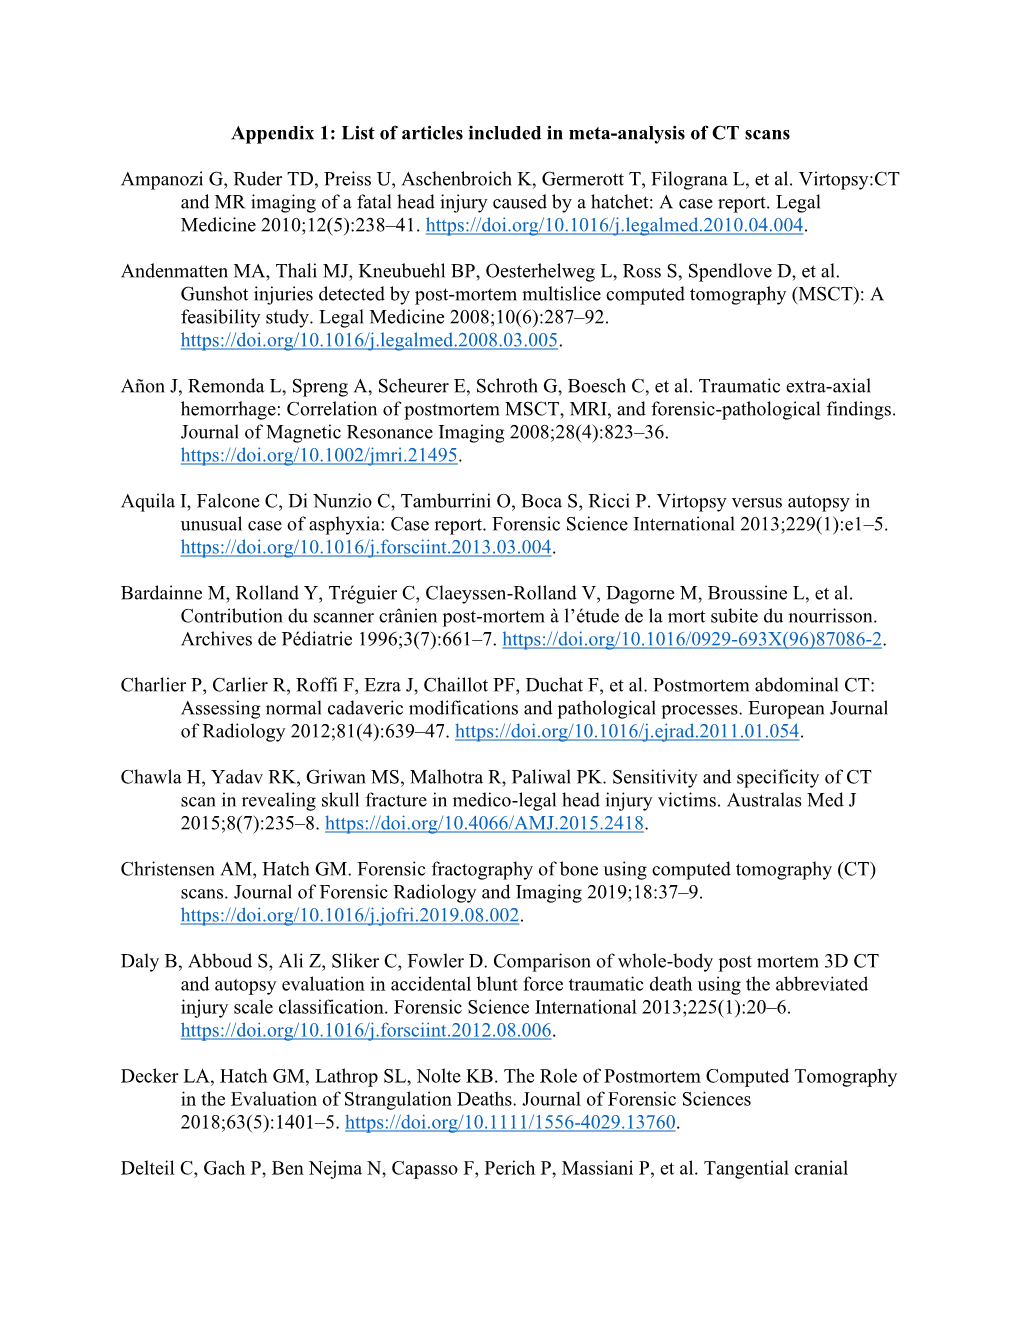 Appendix 1: List of Articles Included in Meta-Analysis of CT Scans